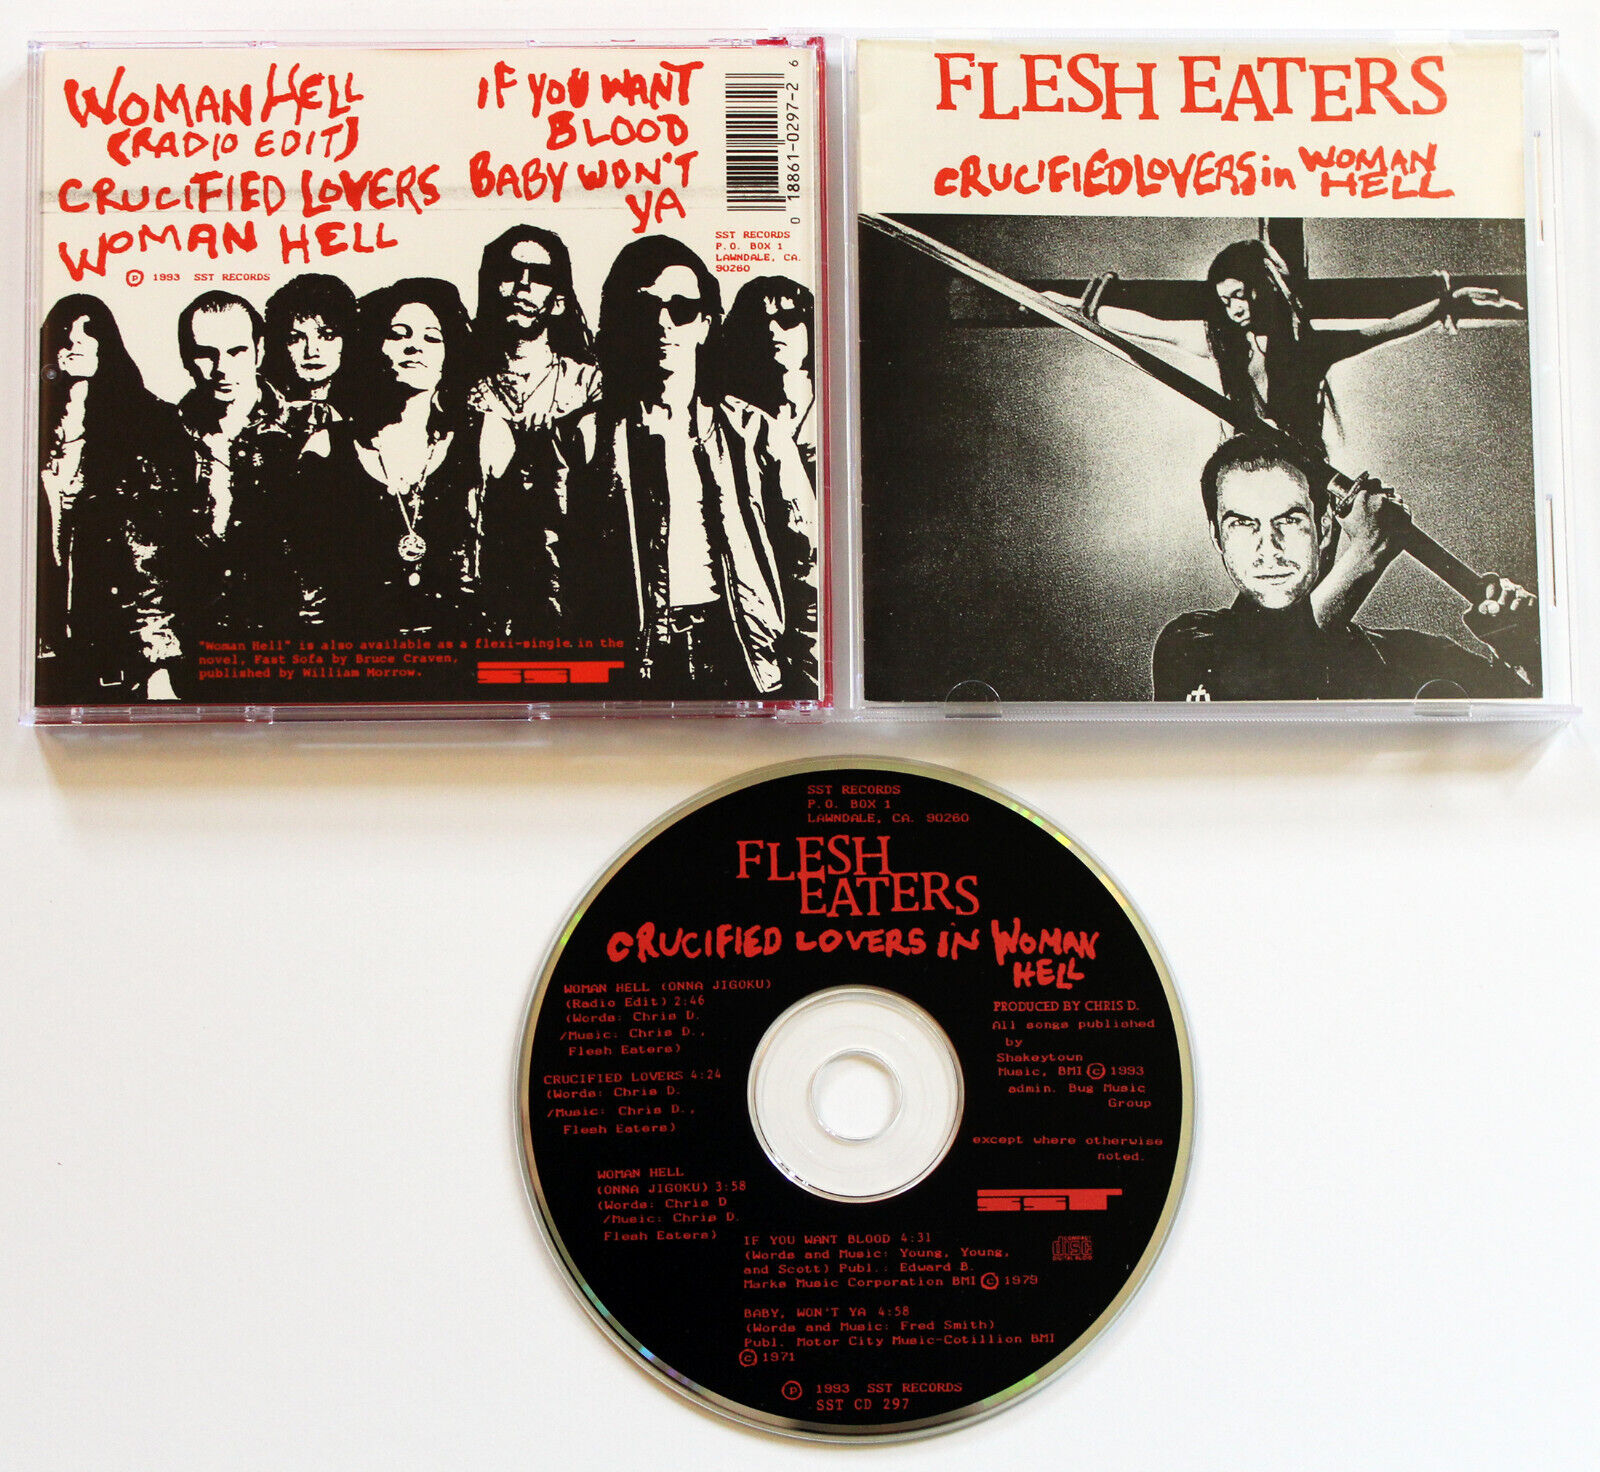 FLESH EATERS Crucified Lovers In Woman Hell CD EP 1993 SST Records CHRIS D. Punk